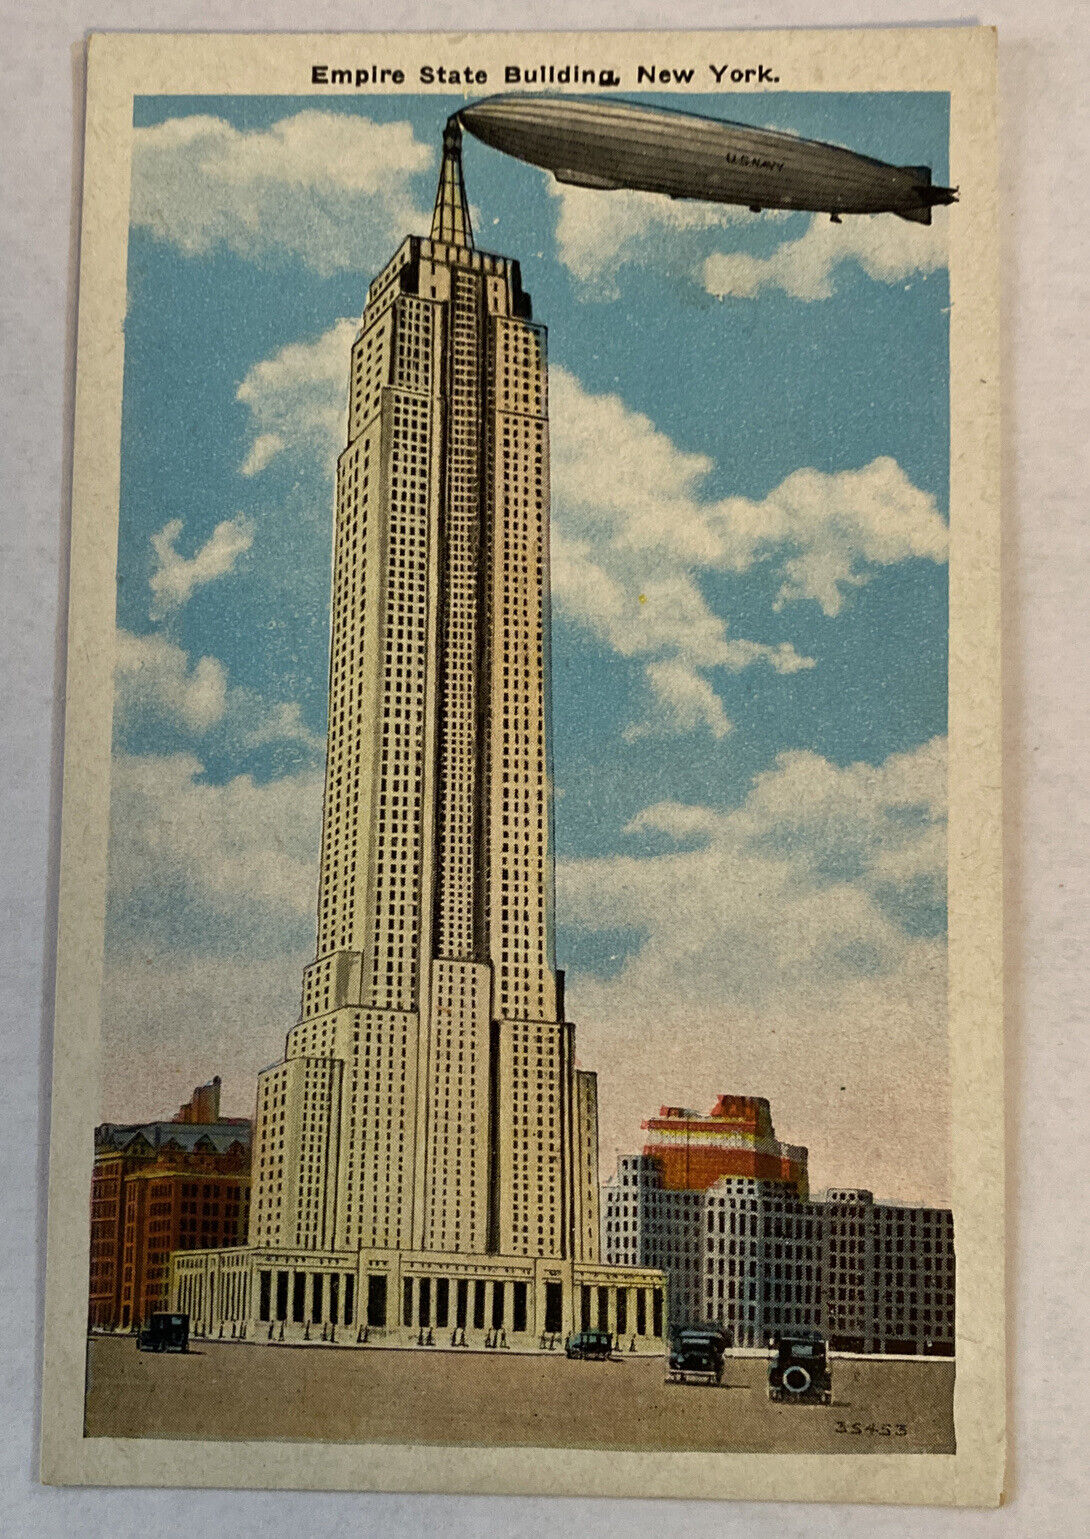 Vintage Postcard Empire State Building With Blimp NYC New York